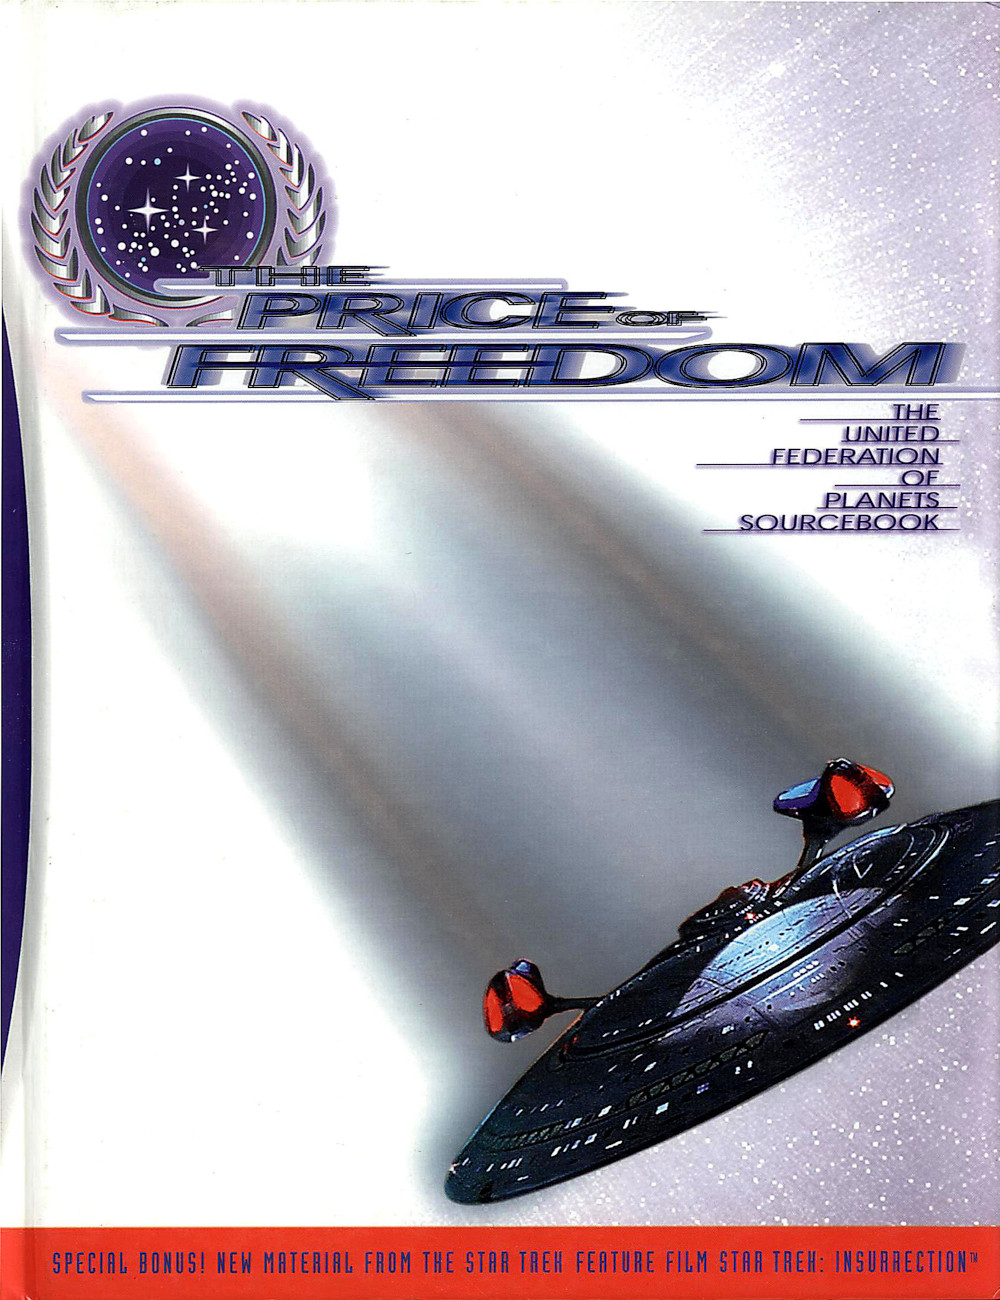 The Price of Freedom: The United Federation of Planets Sourcebook (Feb 1999)